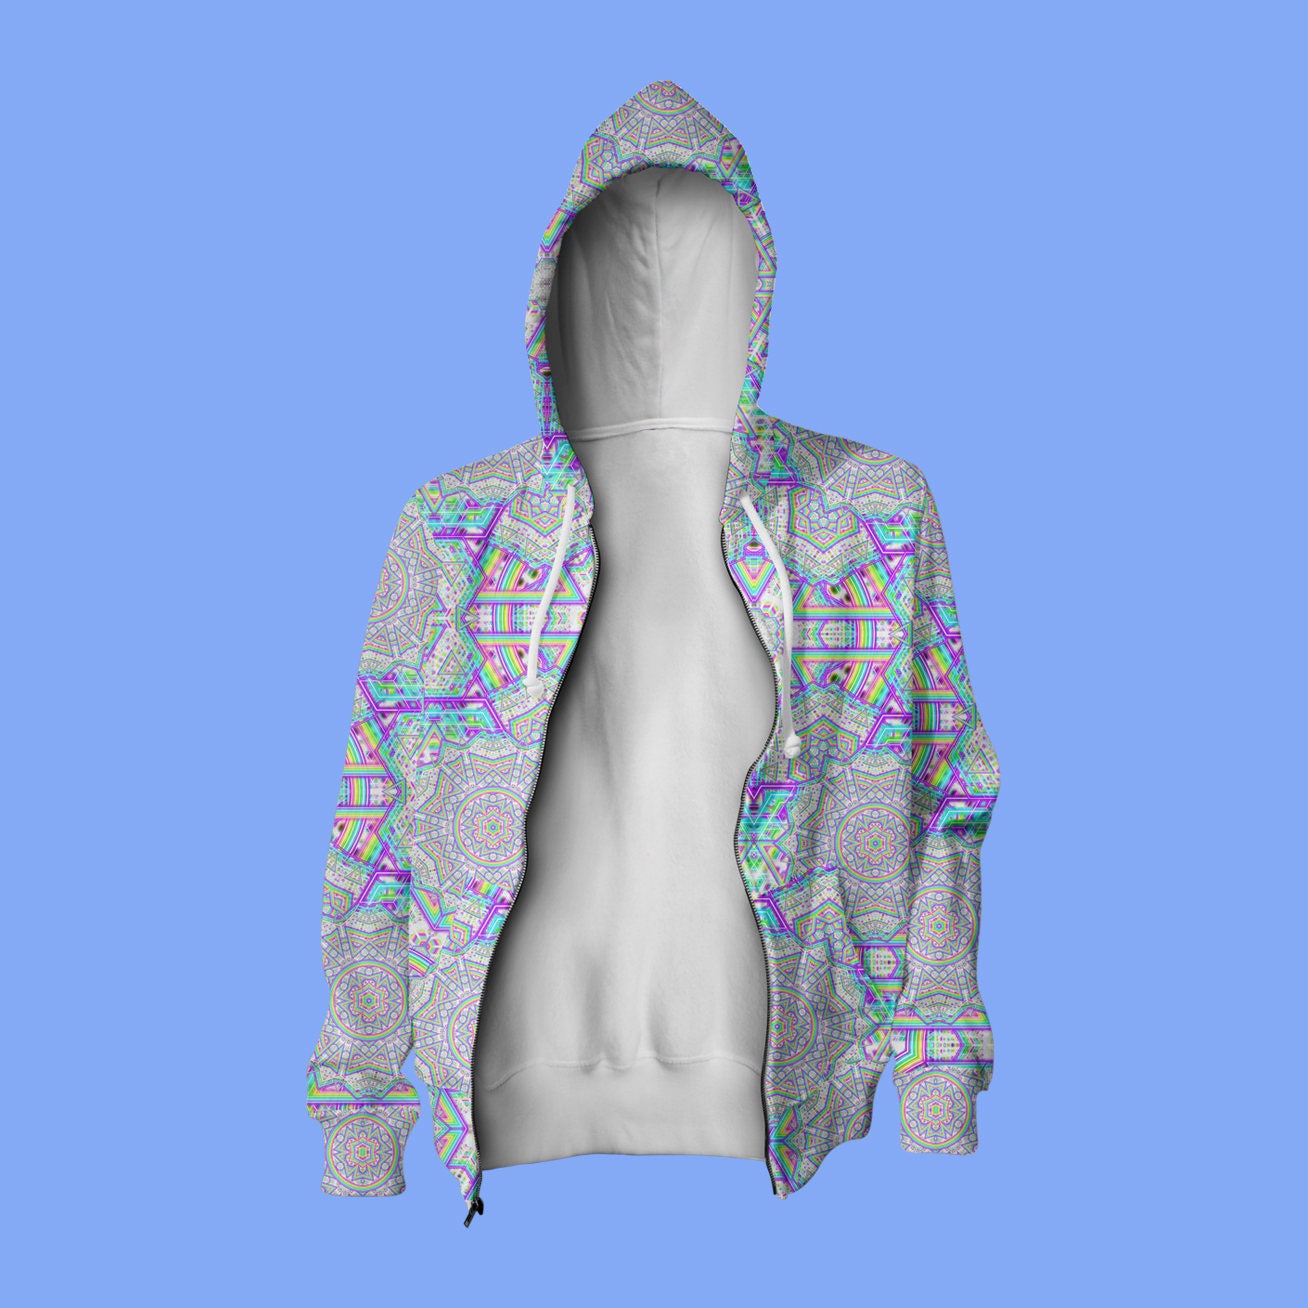 ennoy The Extreme of Simple Hoodie 海外通販サイト - www